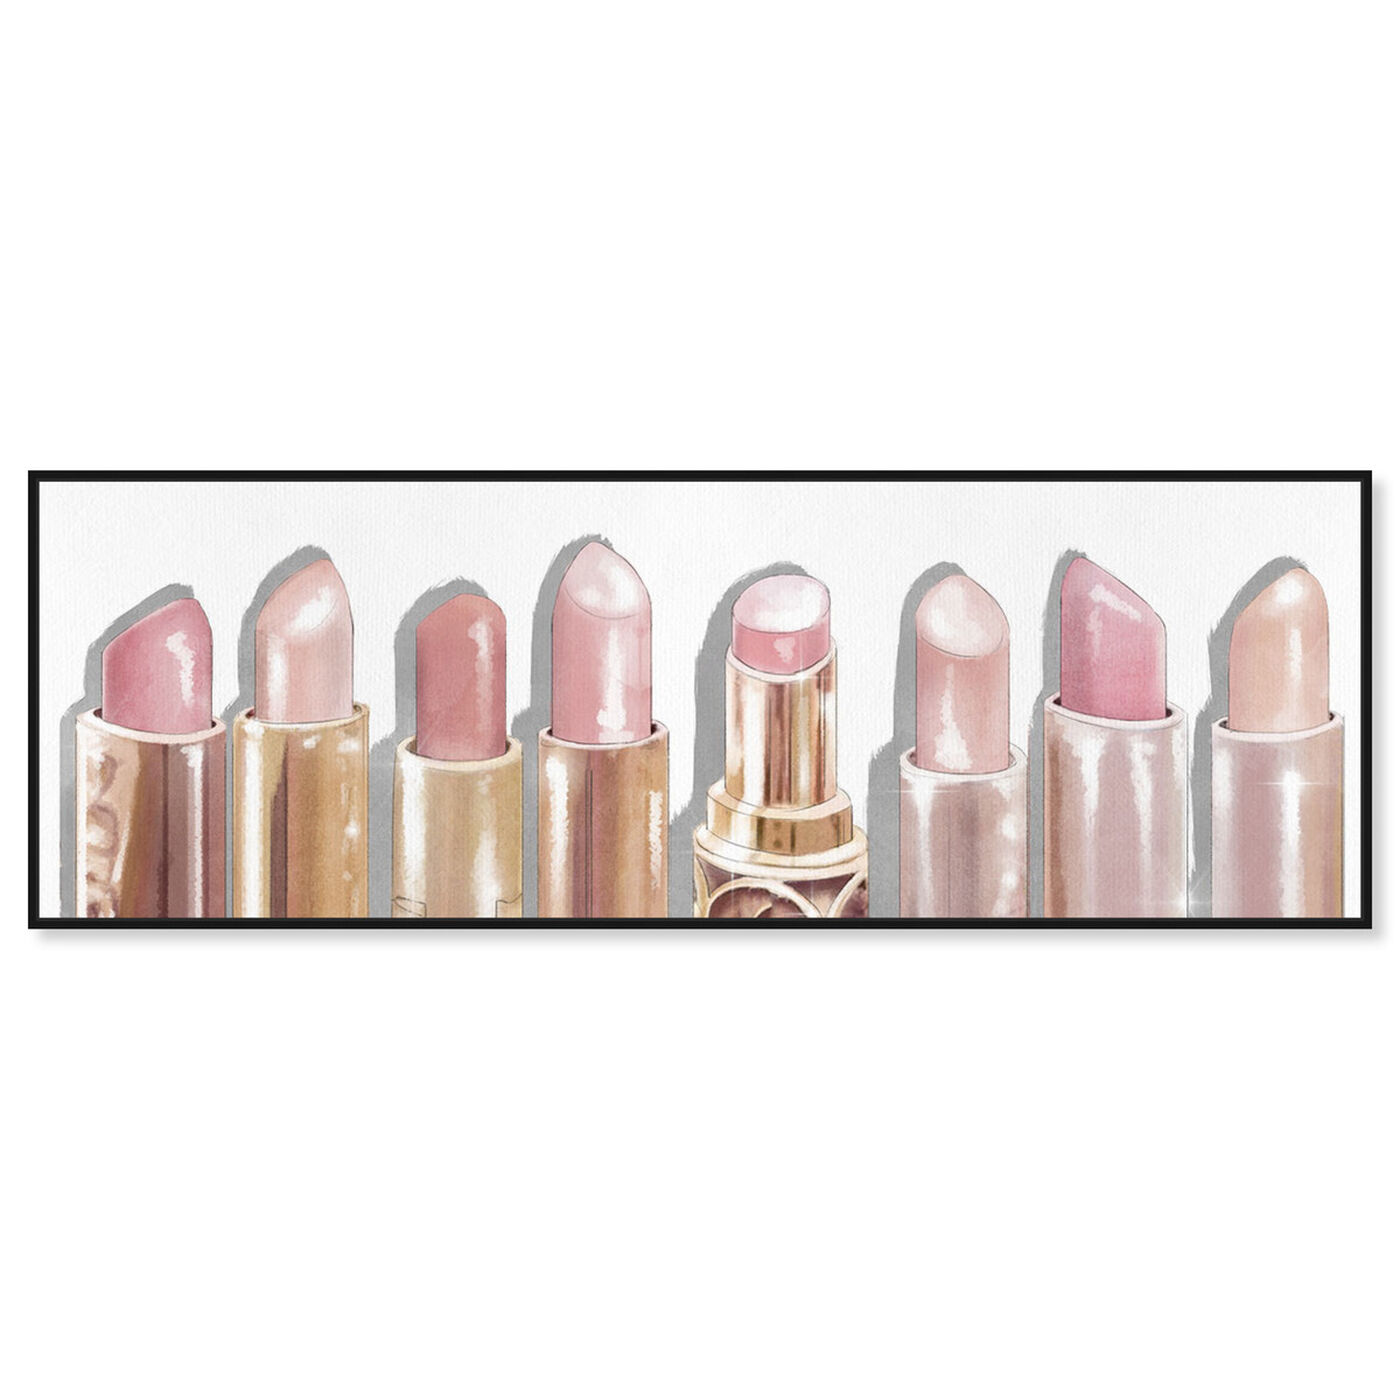 Front view of Lipstick Shades featuring fashion and glam and makeup art.